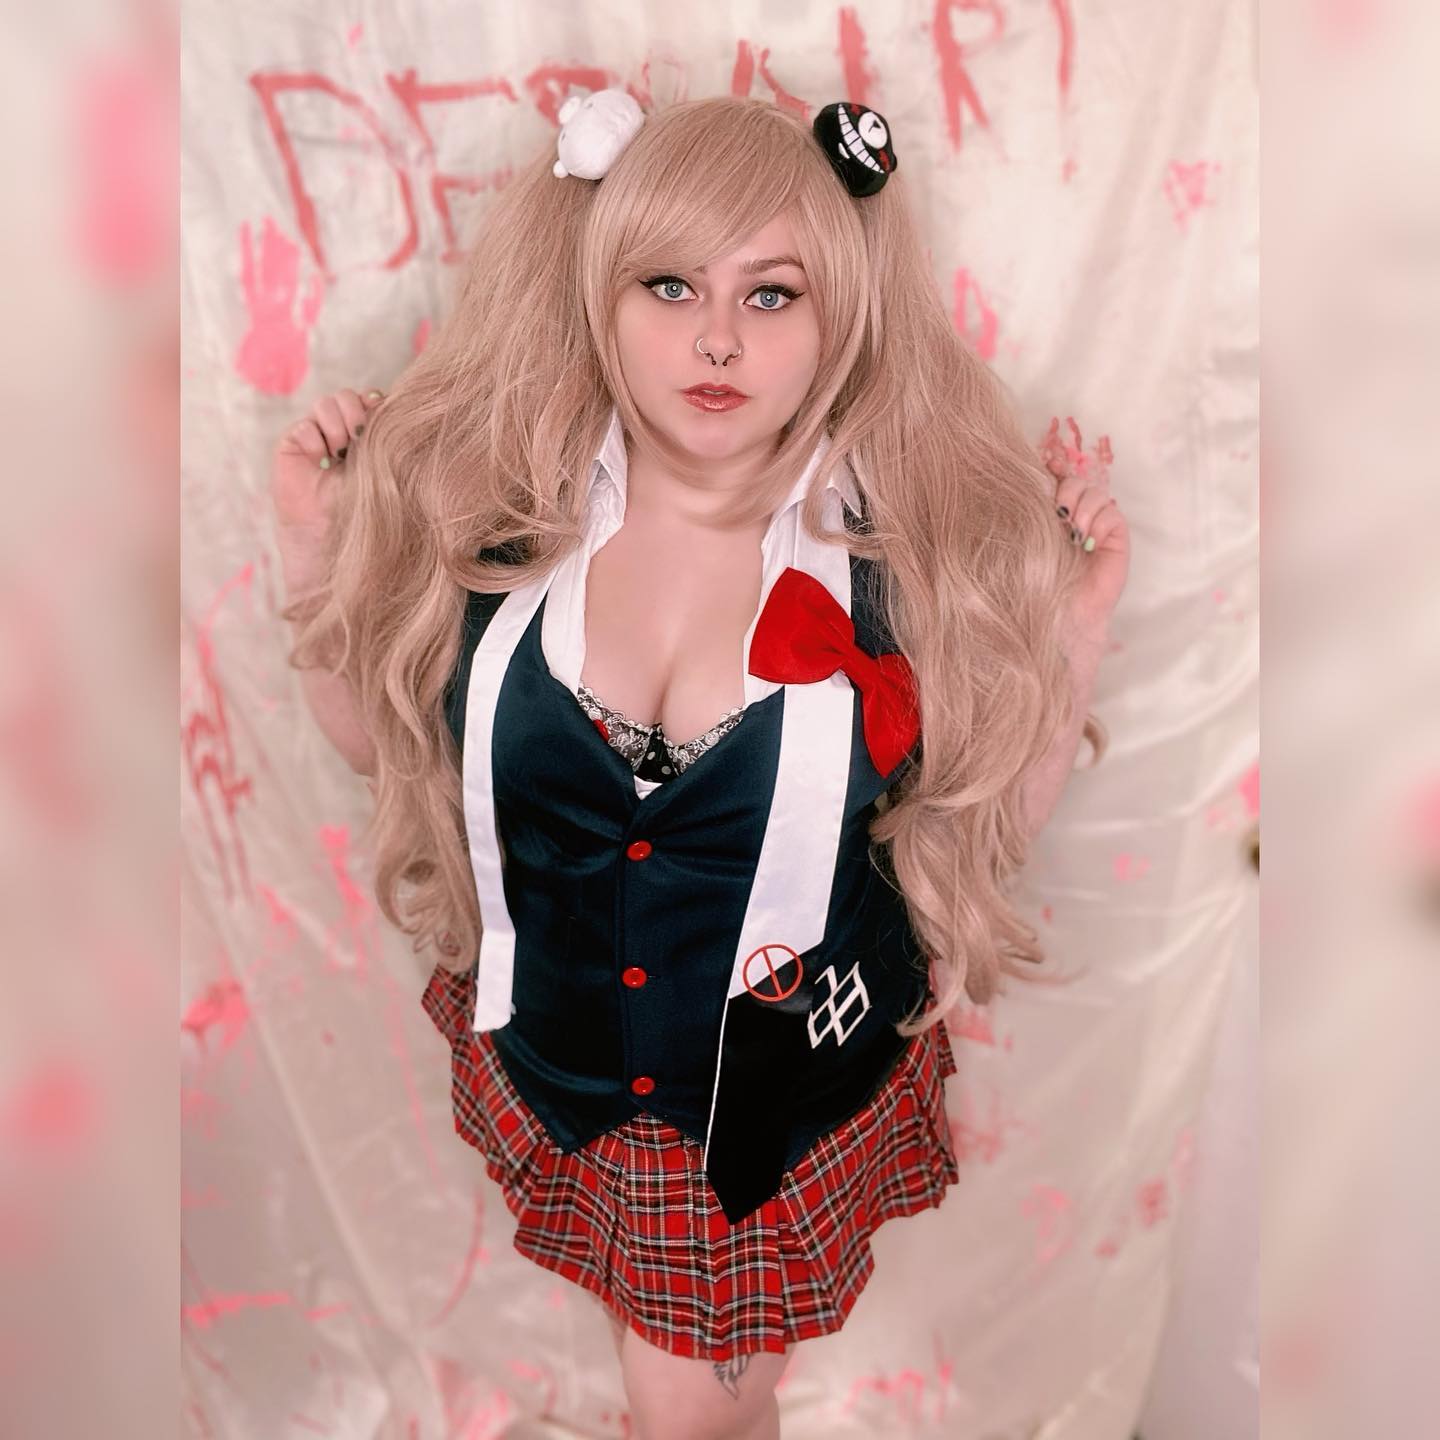 Despair with me 💕

Posting some throwbacks for a while! 🩶

#junkoenoshima #junkoenoshimacosplay #junkocosplay #danganronpa #danganronpacosplay